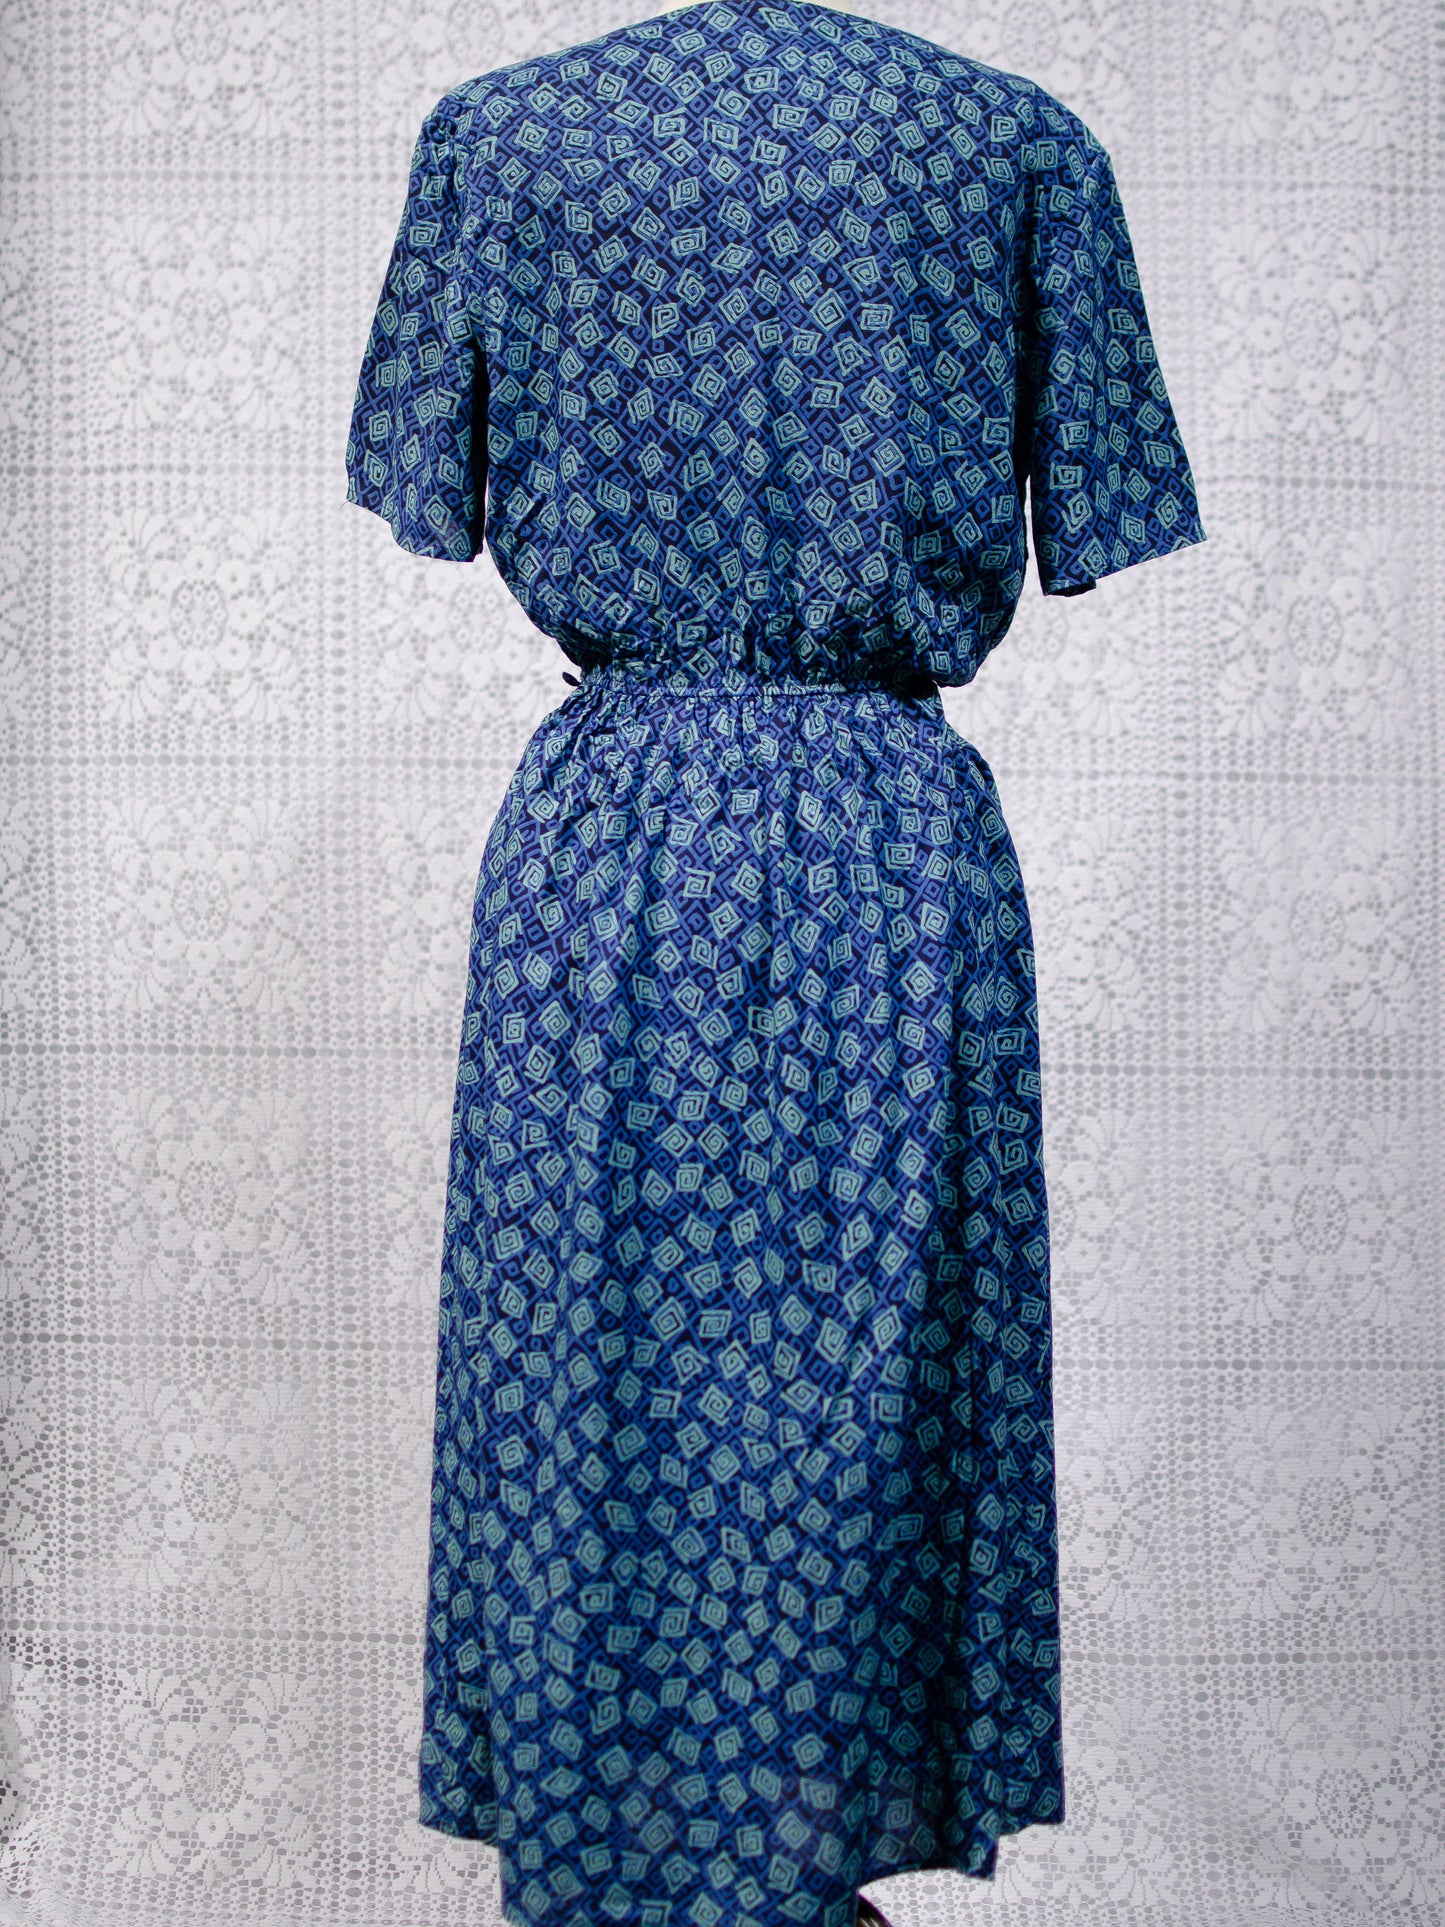 1990s St Michael blue and green abstract pattern short sleeve maxi dress